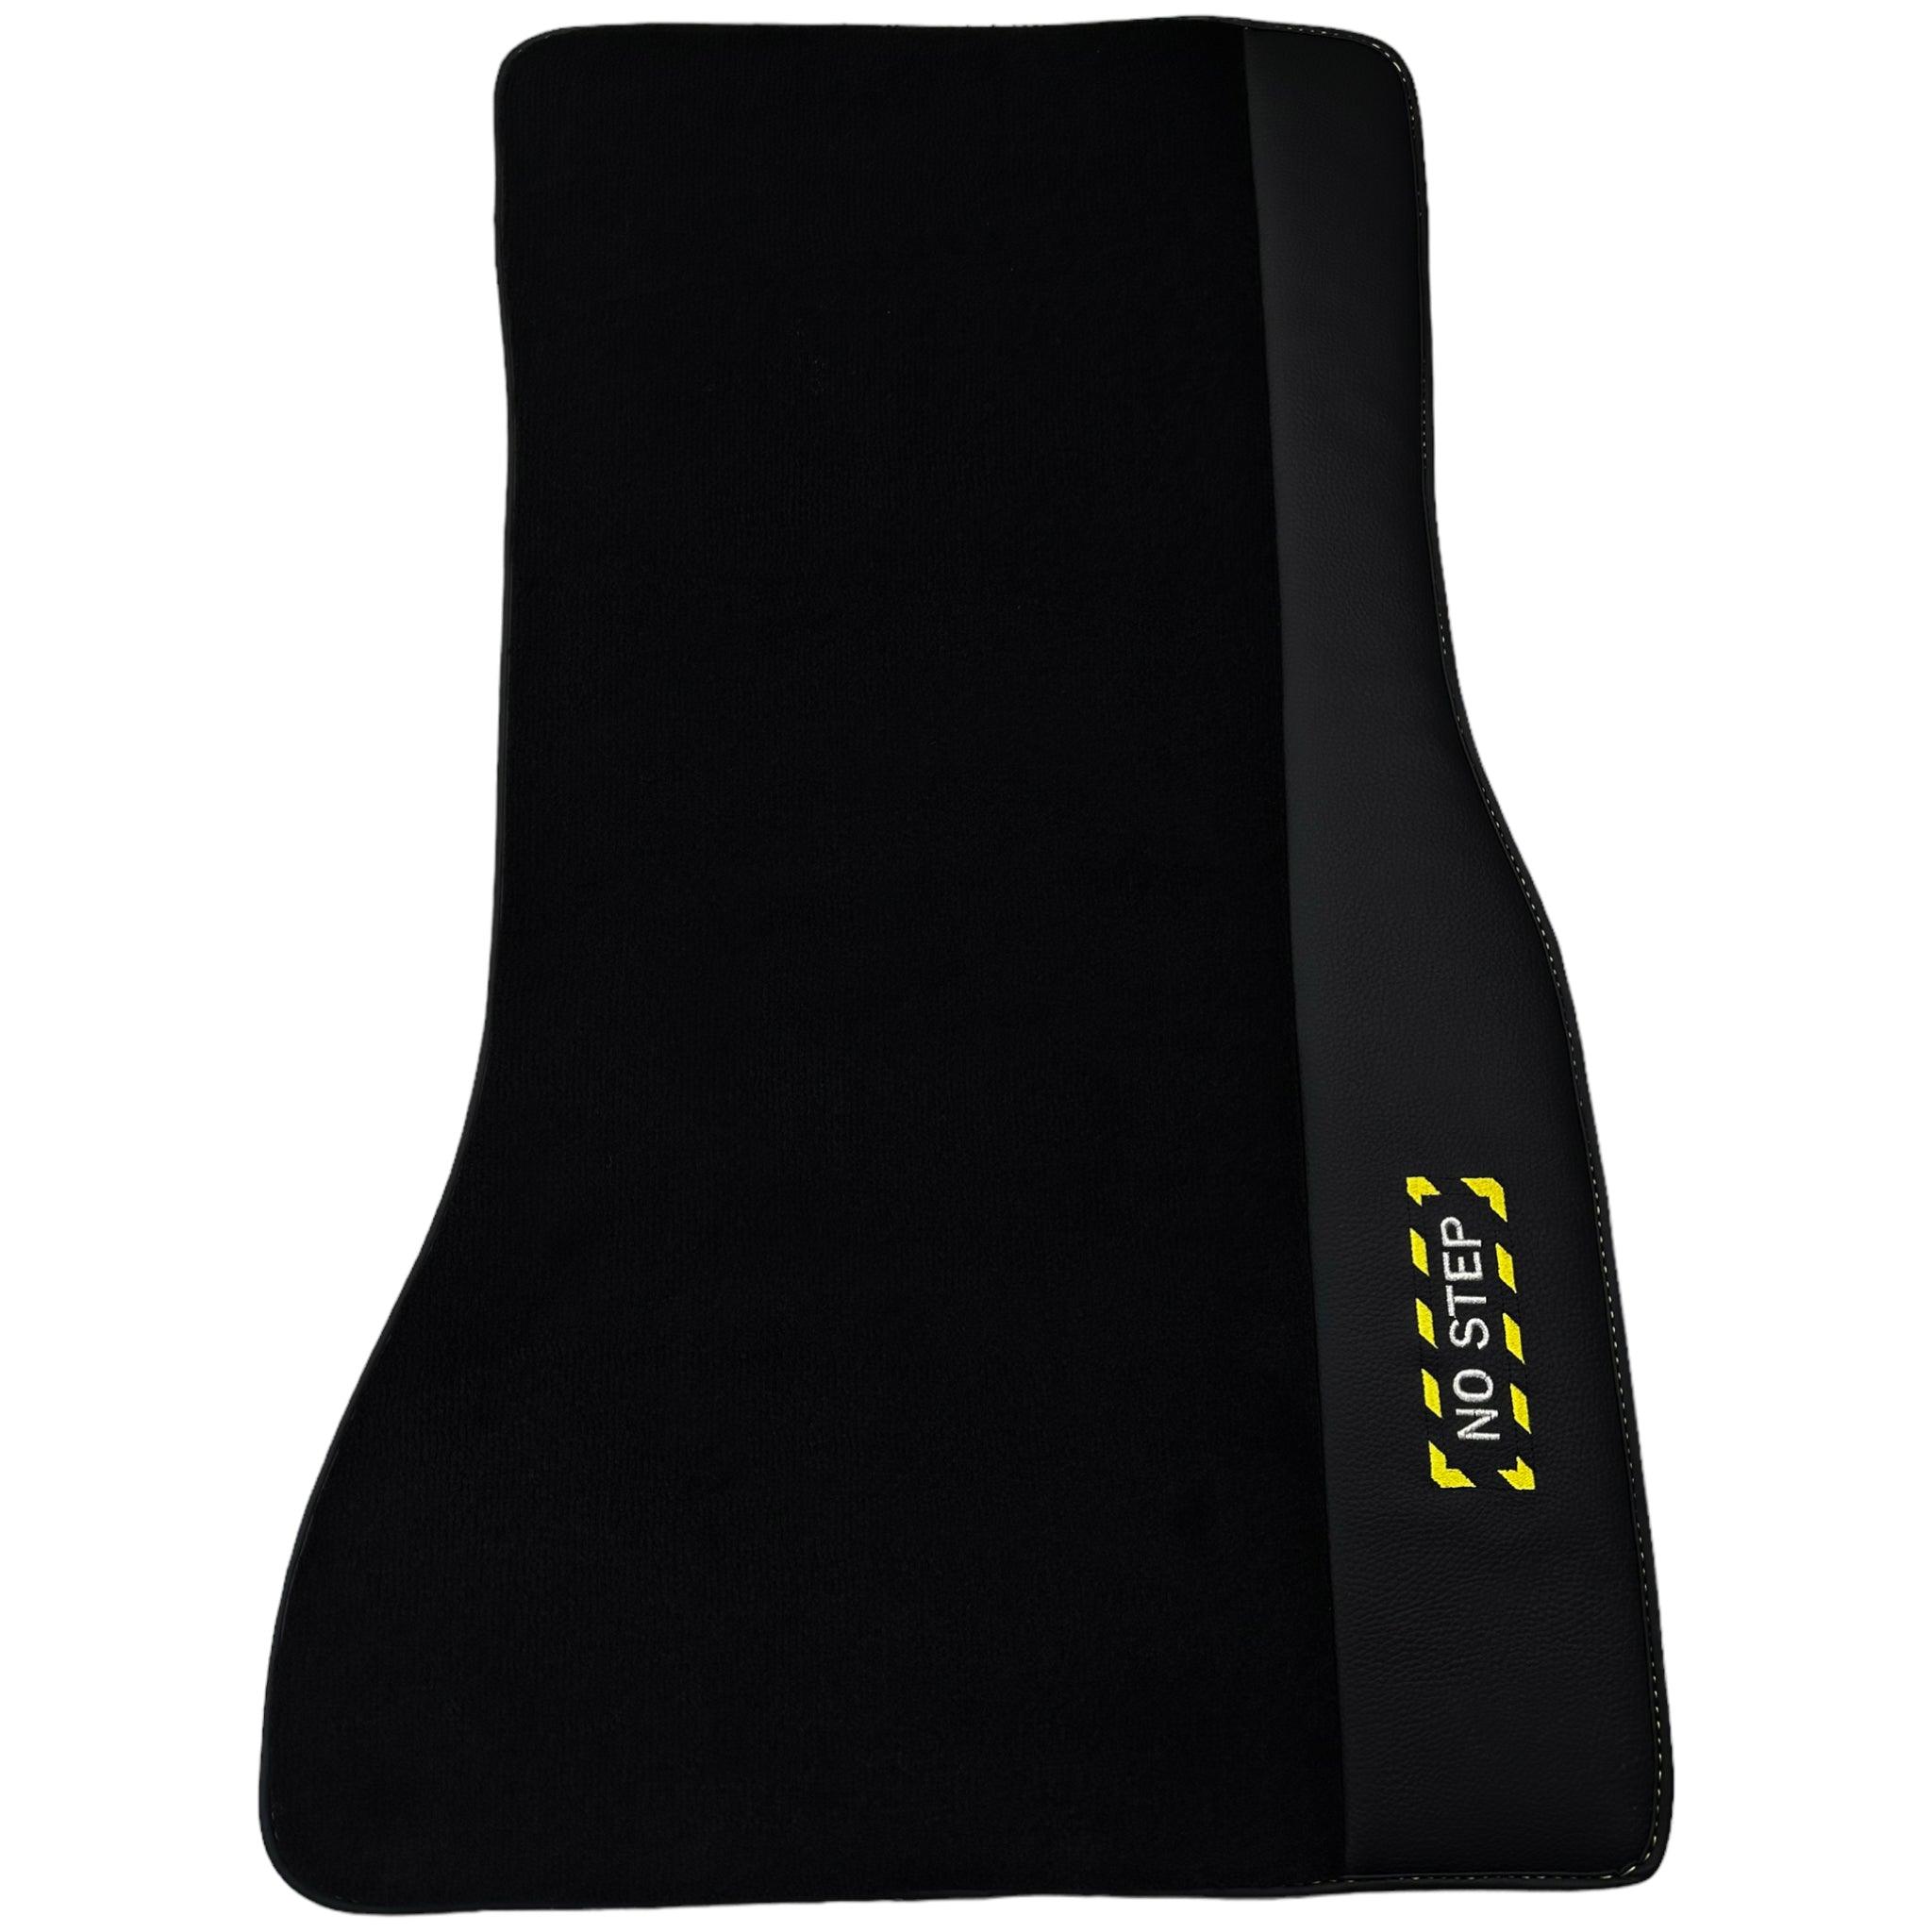 Black Floor Mats with Leather for BMW 5 Series G30 - "Jet Fuel Only"